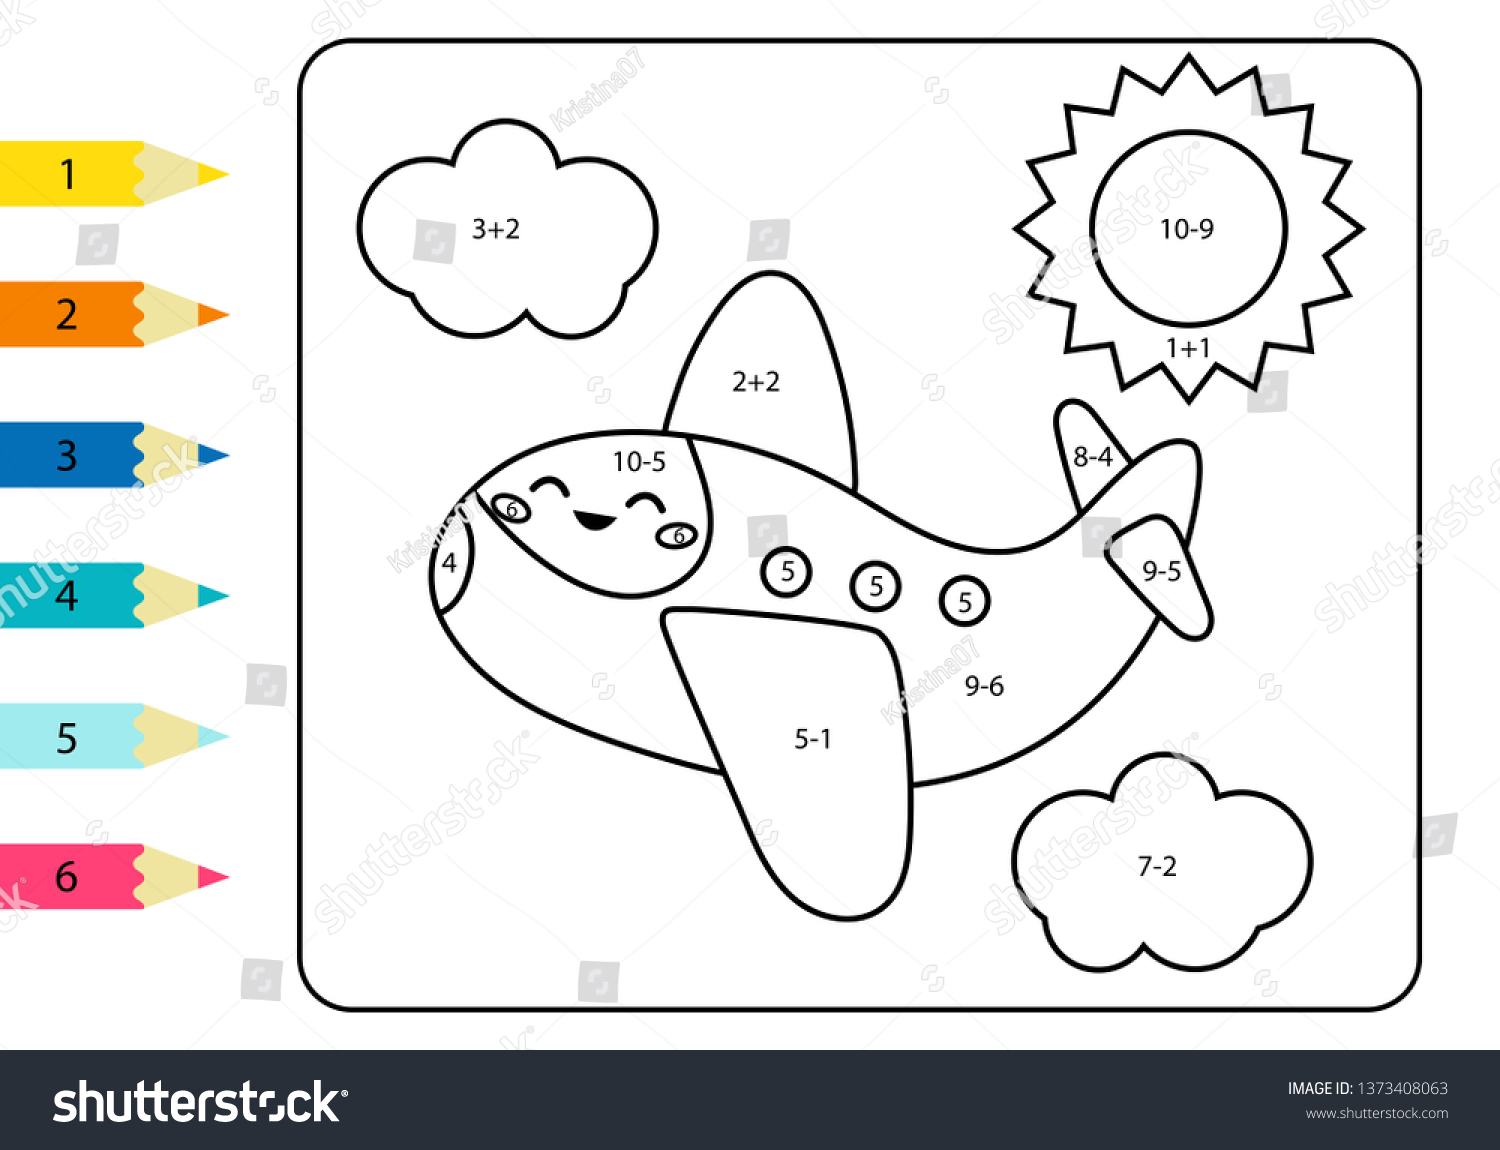 coloring page by addition subtraction numbers stock vector royalty free 1373408063 shutterstock